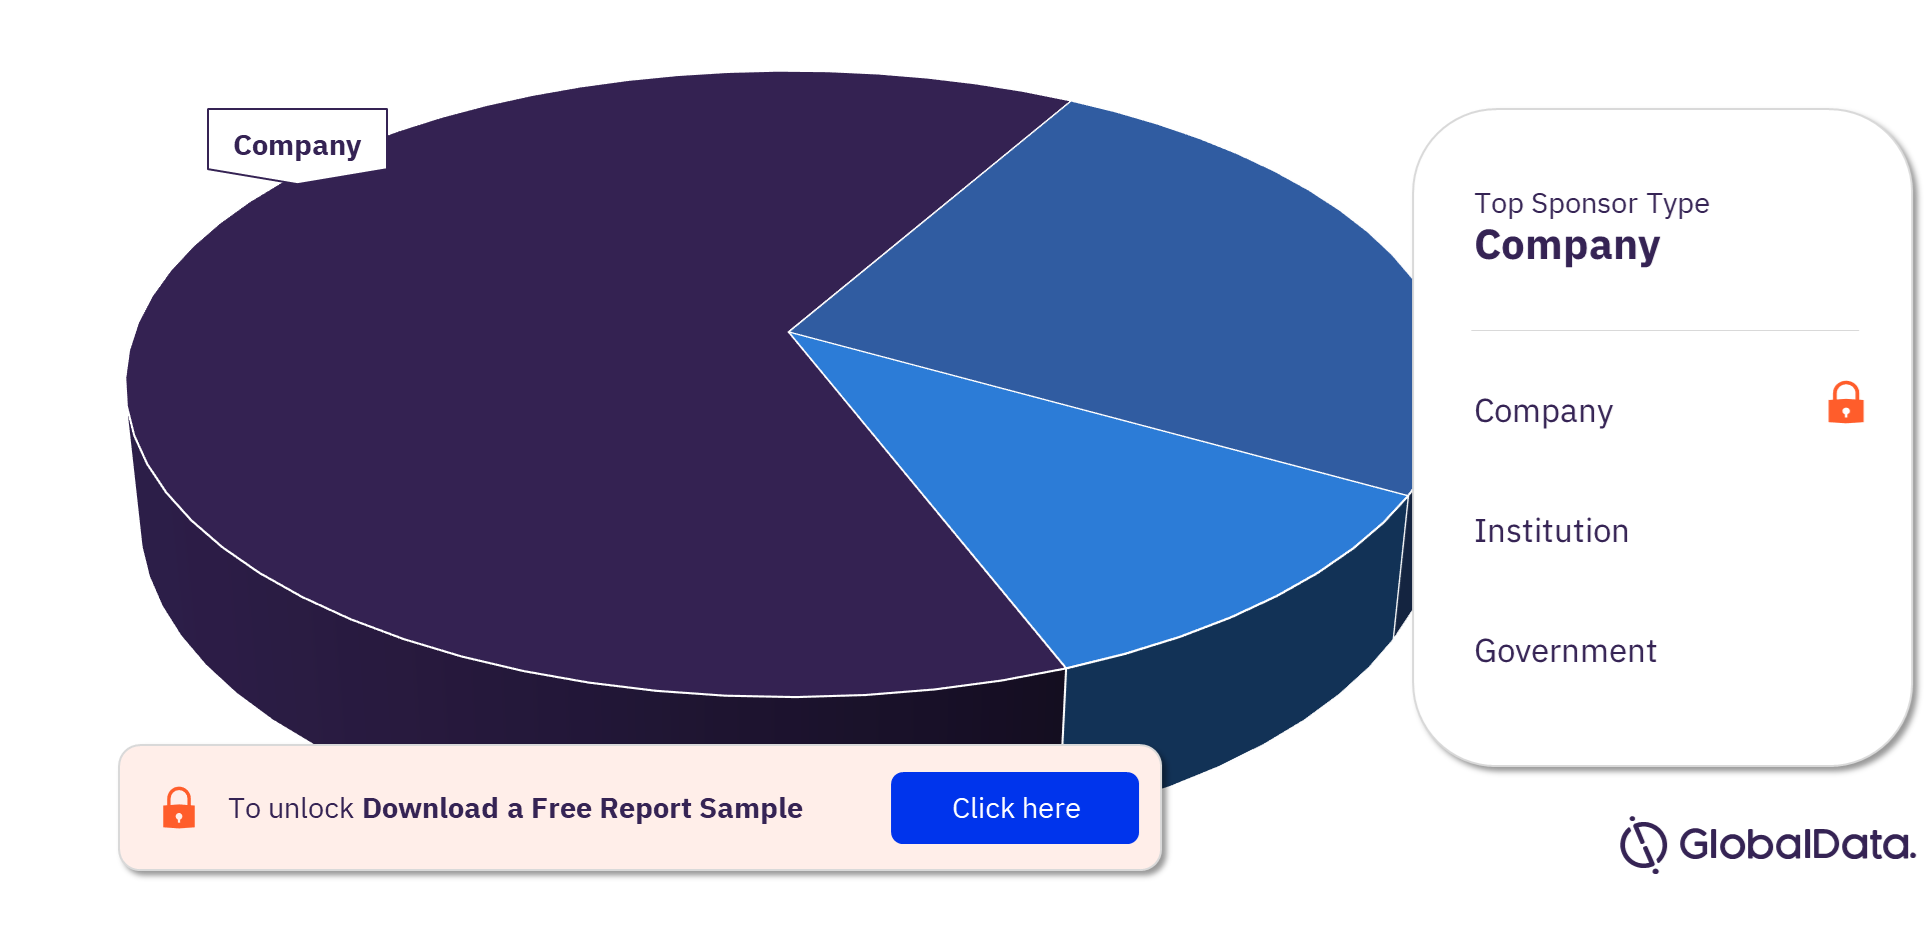 Postherpetic Neuralgia Clinical Trials Market Analysis by Sponsor Types, 2023 (%)